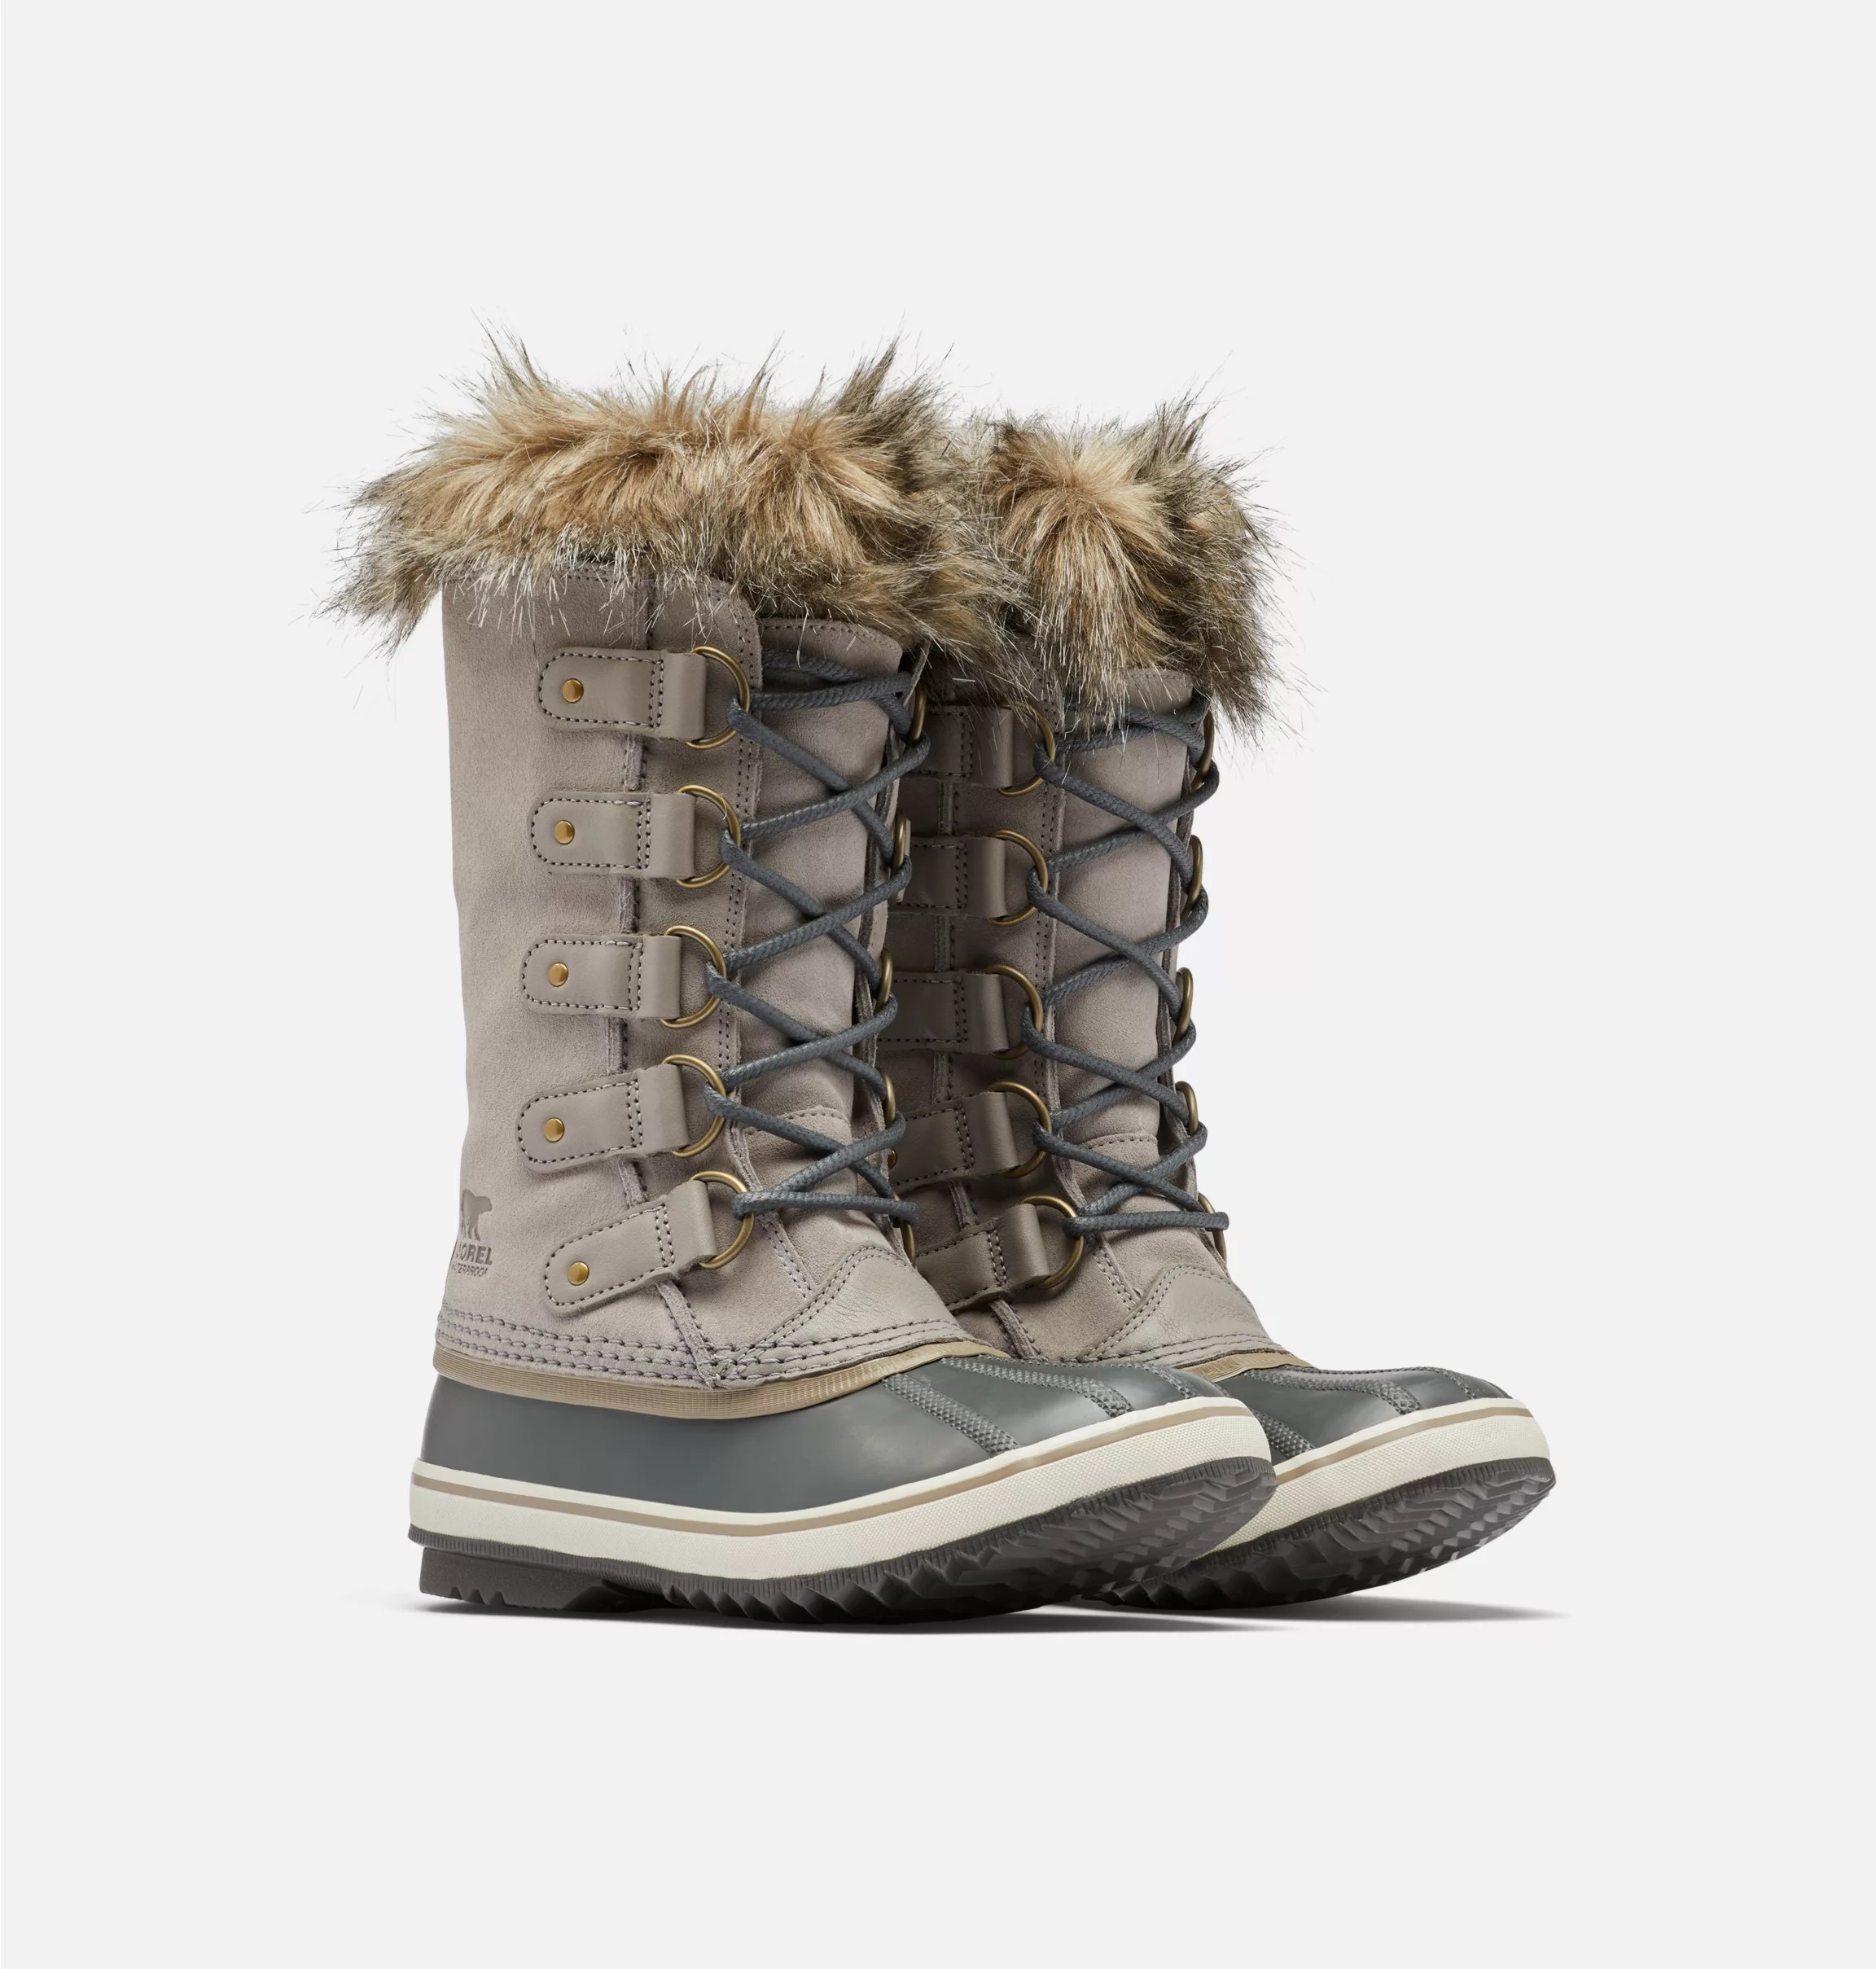 sorel joan of arctic boots on a grey background